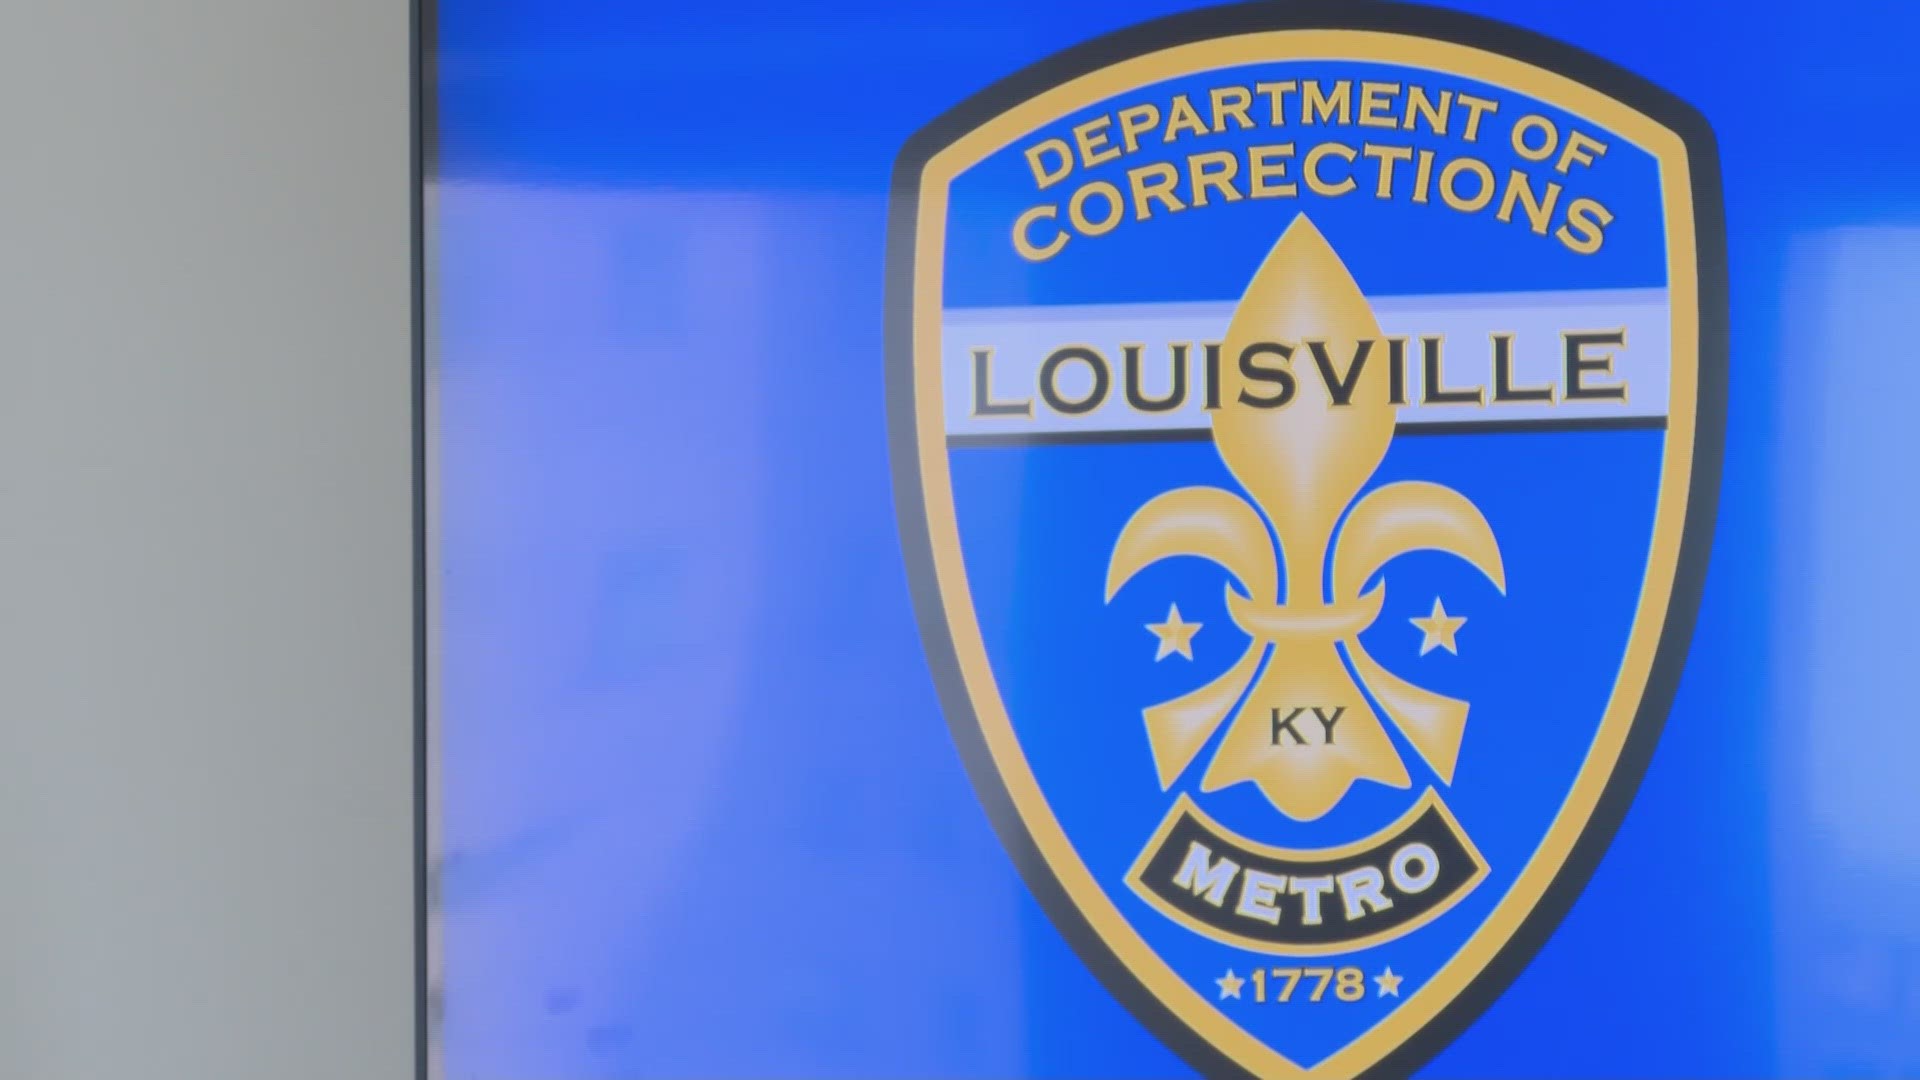 The report details unsafe conditions inside the jail for both inmates and officers. Investigators say if the needs are not addressed, more people could die inside.